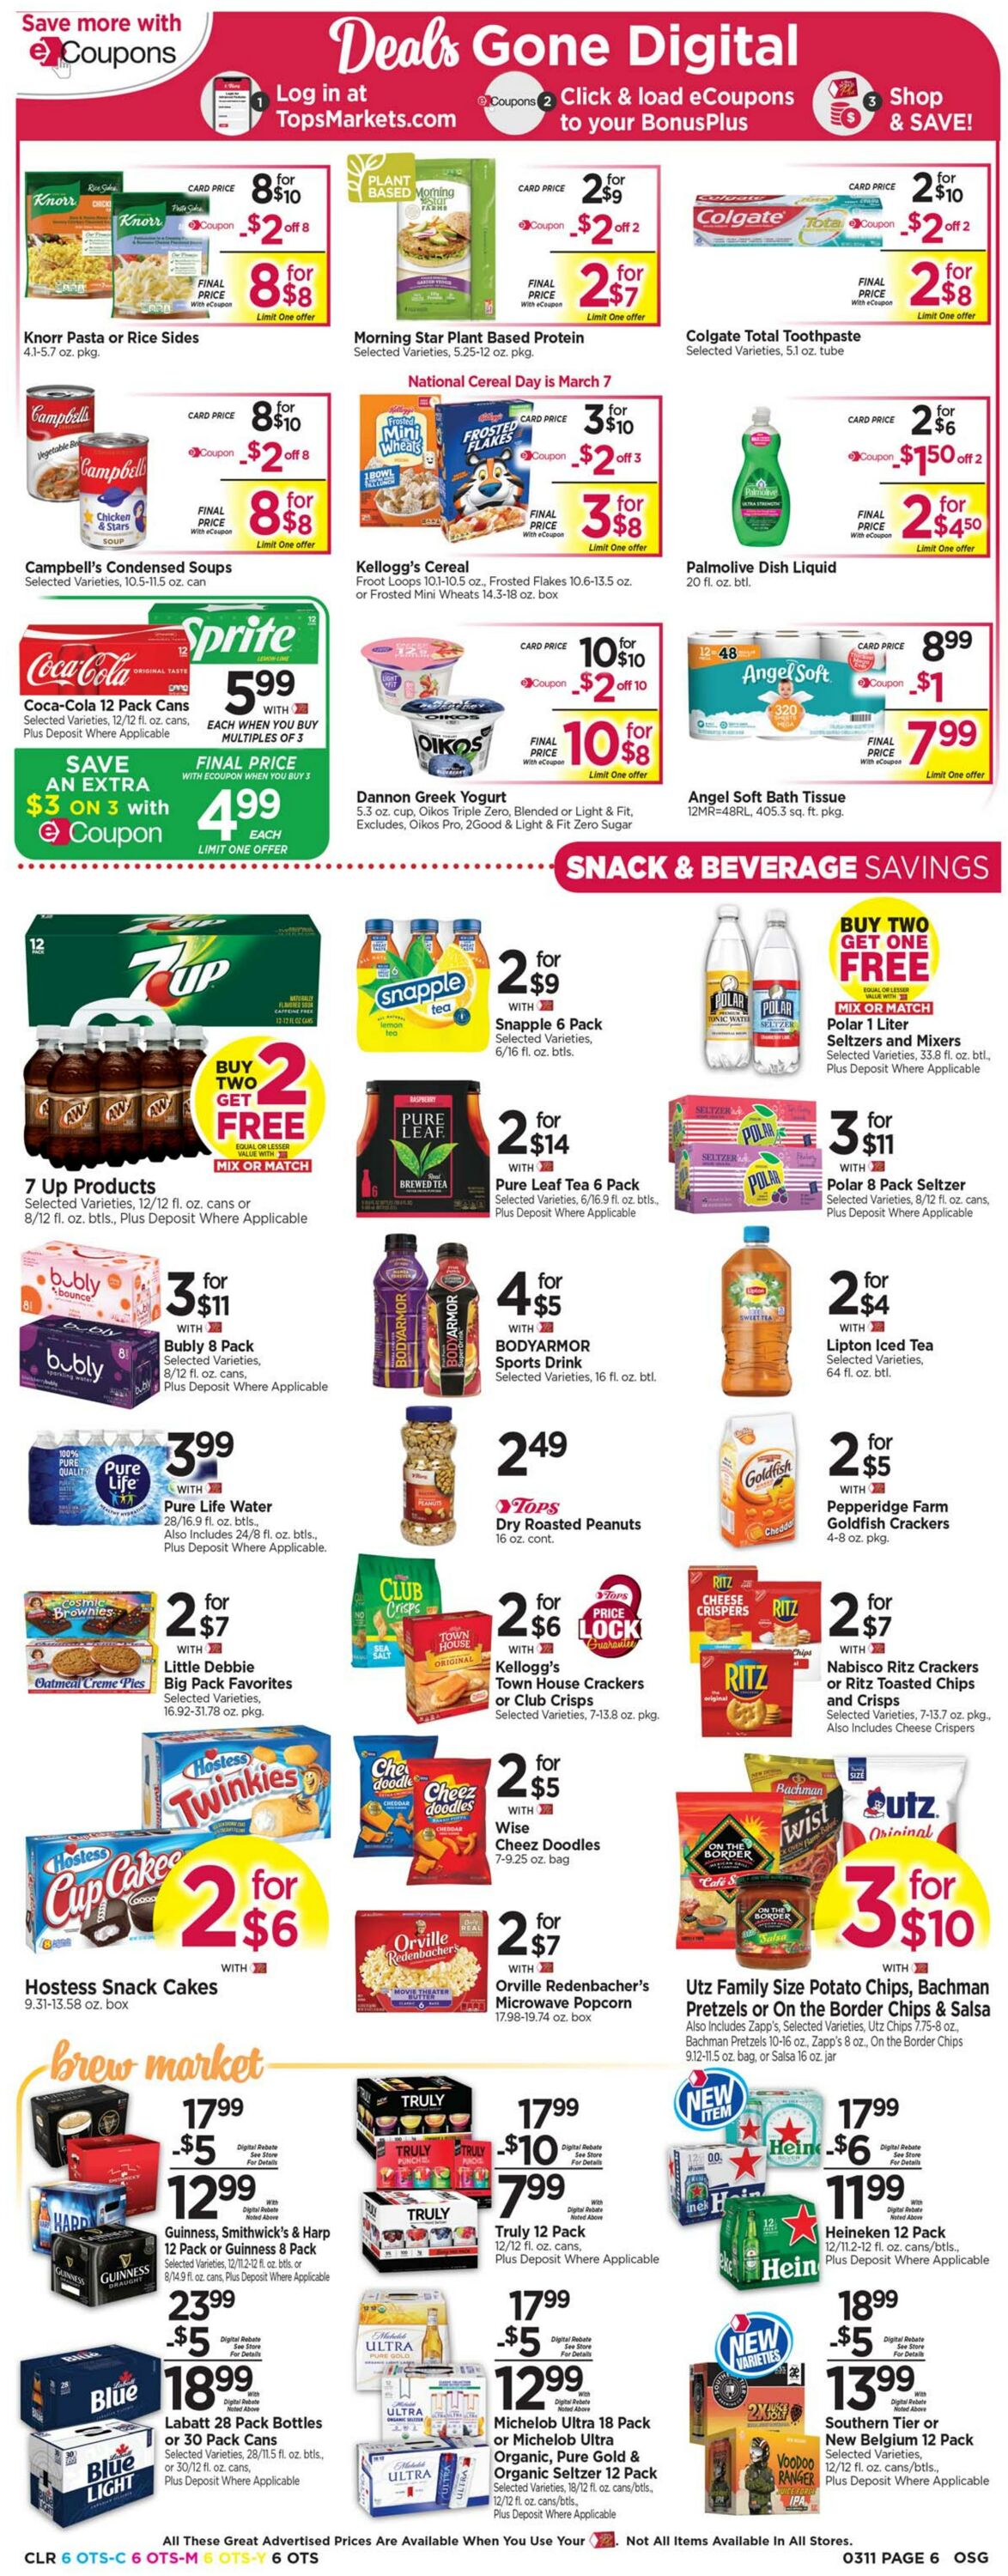 Weekly ad Tops Friendly Markets 03/05/2023 - 03/11/2023